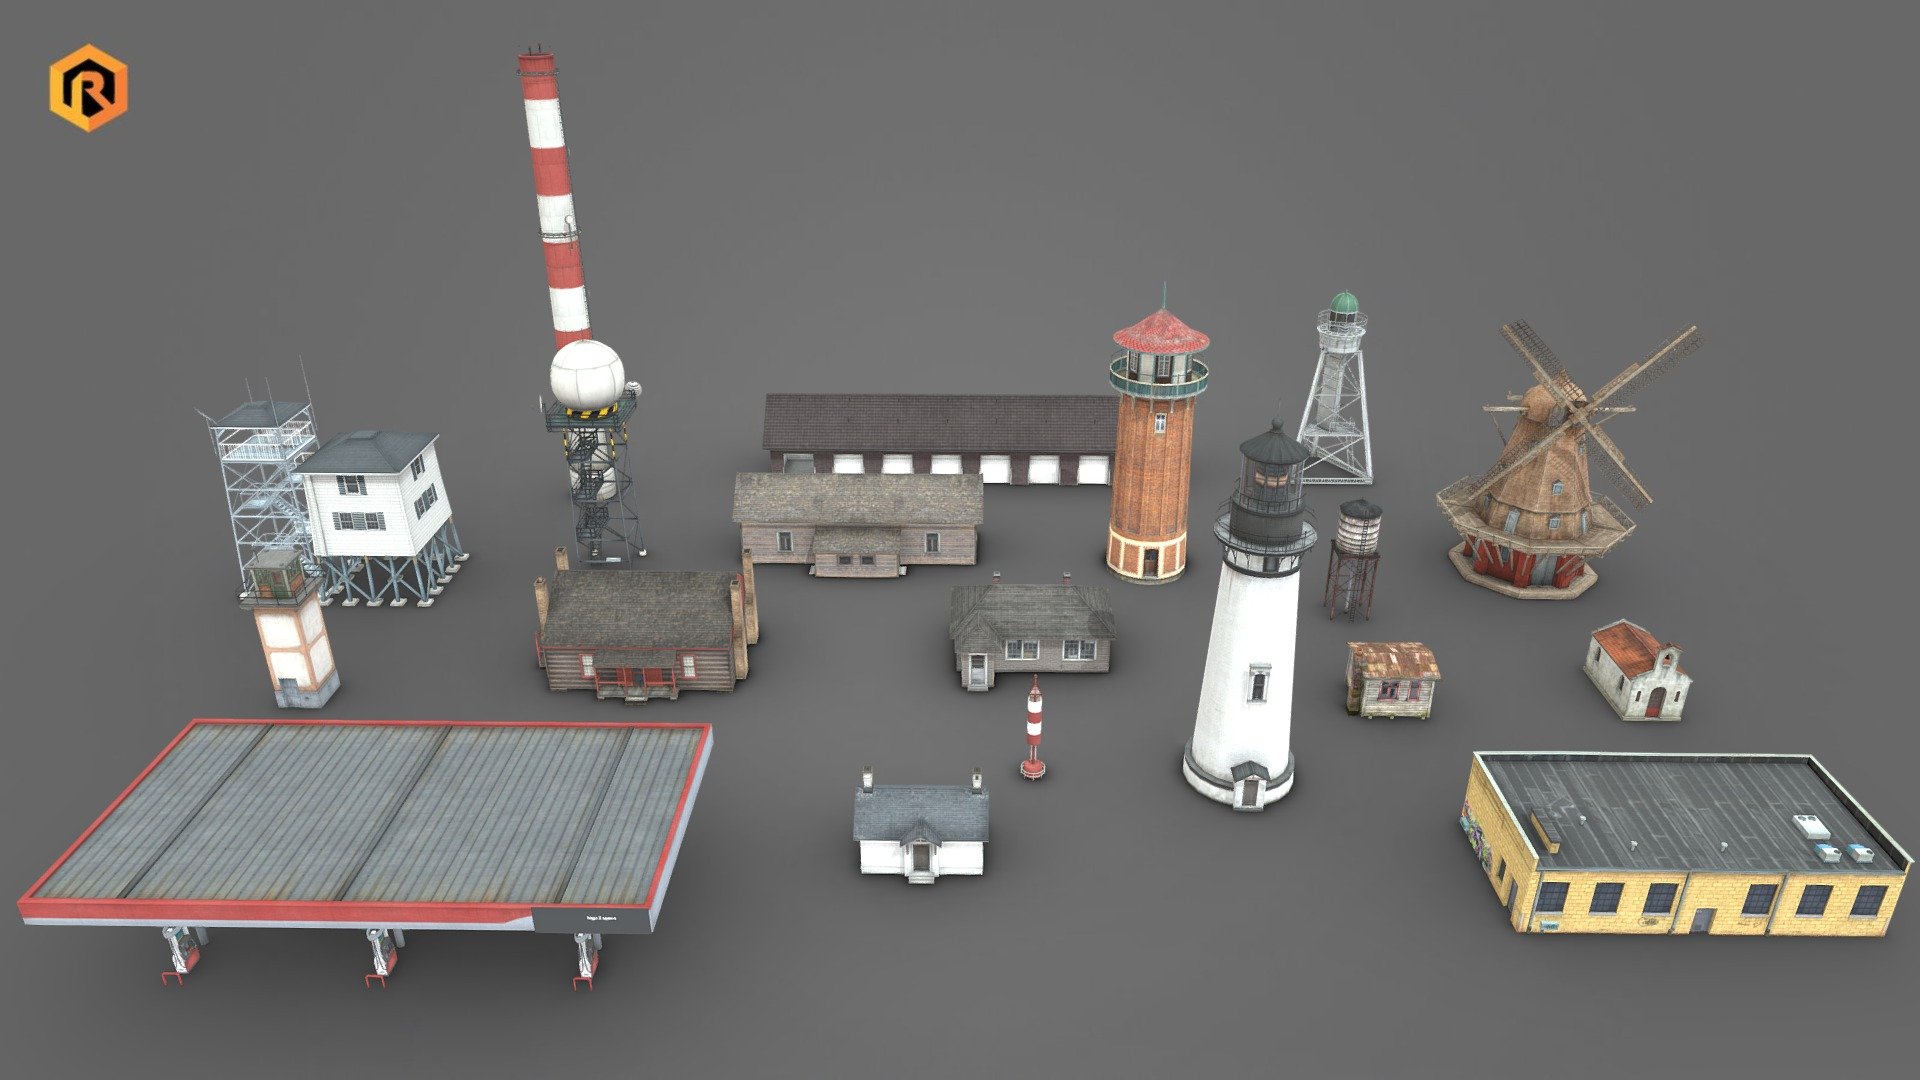 The collection contains 19 low-poly 3d models of various types of buildings and structures.

There are some towers, windmill, residential and some industrial buildings in this package. 

These models are best for use in games and other VR / AR, real-time applications such as Unity or Unreal Engine. 

Technical details:




The whole collection contains about 30k tris.

Mostly 2048 up to 4096 Diffuse and AO textures per model.

Models are correctly divided into parts when needed.

Models are completely unwrapped.

Models are fully textured with all materials applied.

Lot of additional file formats included (Blender, Unity, Maya etc.)

More file formats are available in additional zip file on product page.

Please feel free to contact me if you have any questions or need any support for this asset.

Support e-mail: support@rescue3d.com - 19 Buildings & Structures Collection - Vol 1 - Buy Royalty Free 3D model by Rescue3D Assets (@rescue3d) 3d model